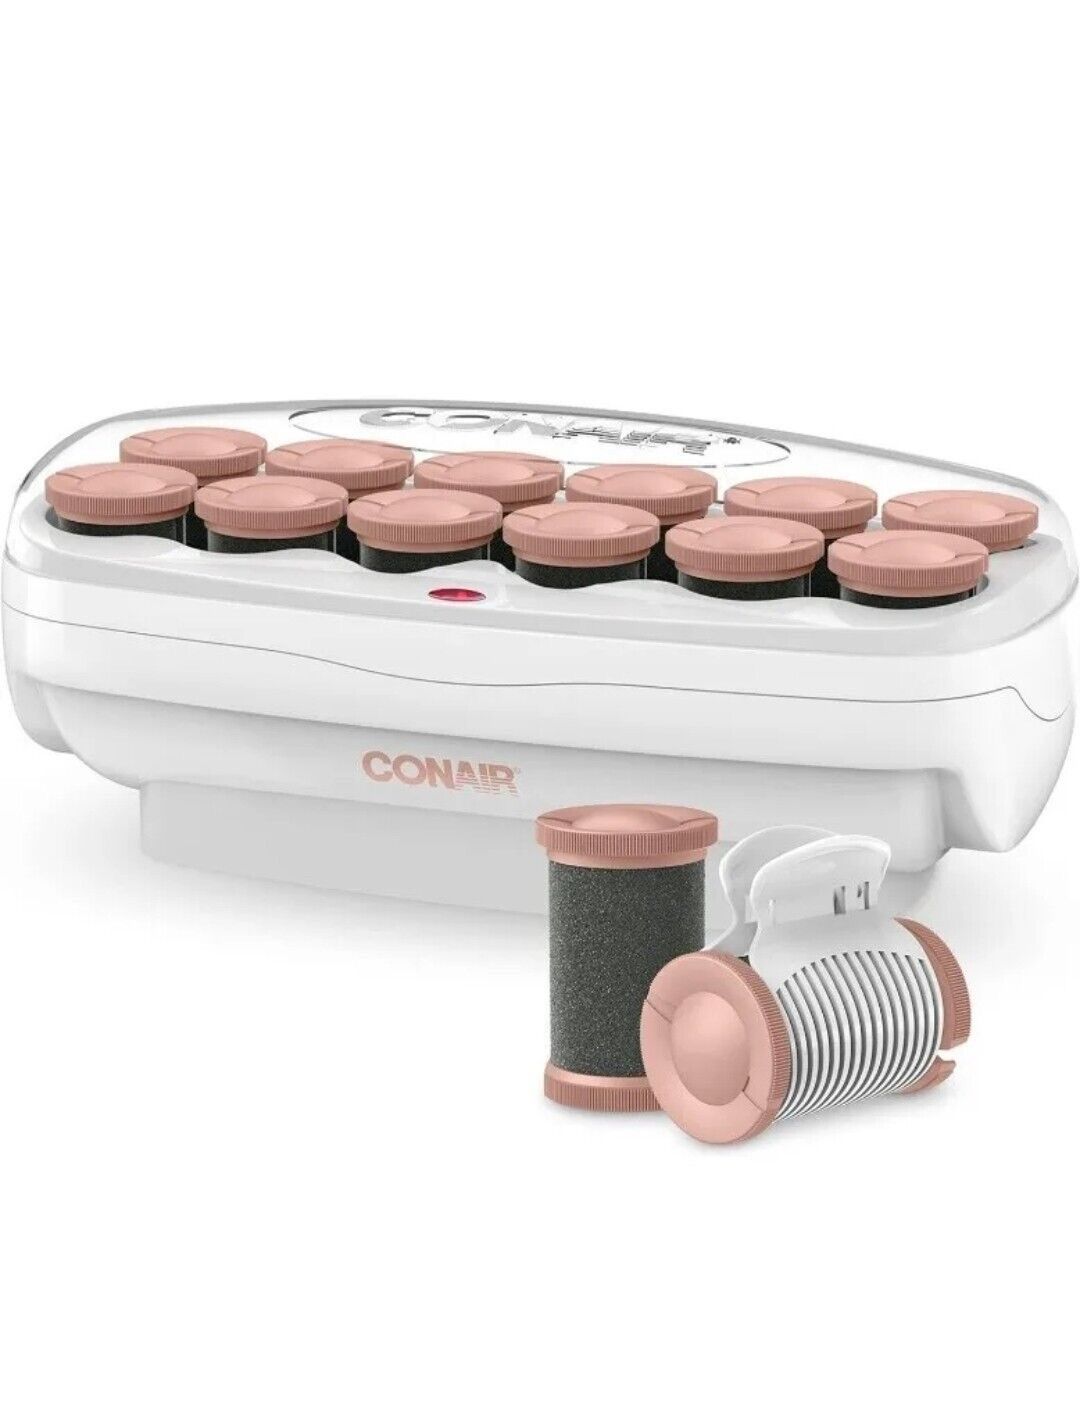 Conair Waves & Volumes 12 Jumbo Hot Rollers 1 1/2 Inch With Super Clips - Pink